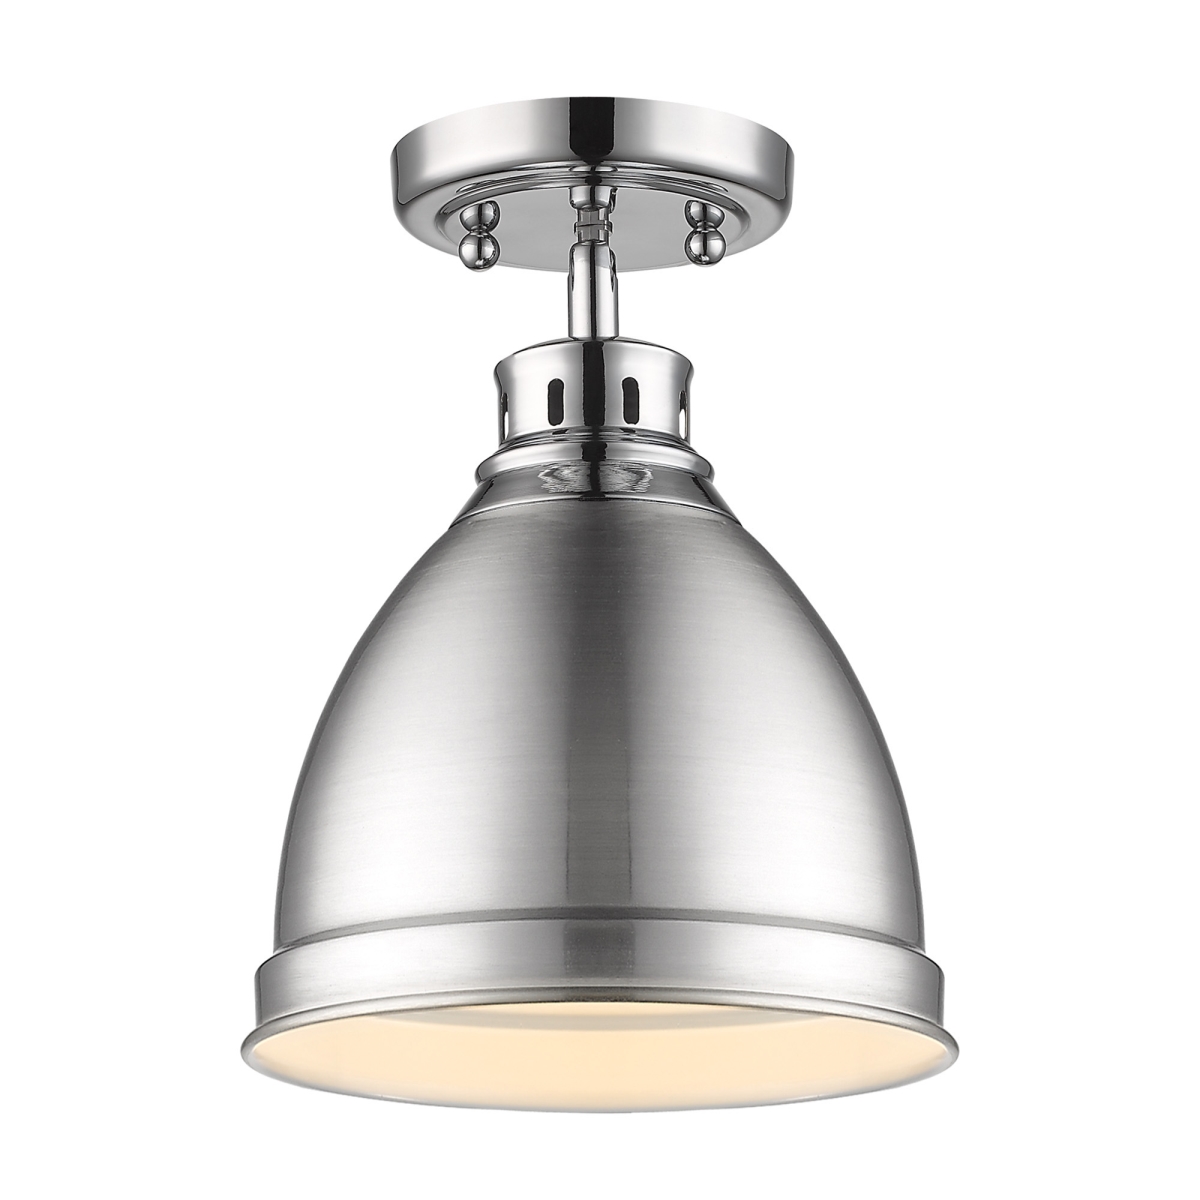 3602-fm Ch-pw Duncan Flush Mount In Chrome With A Pewter Shade